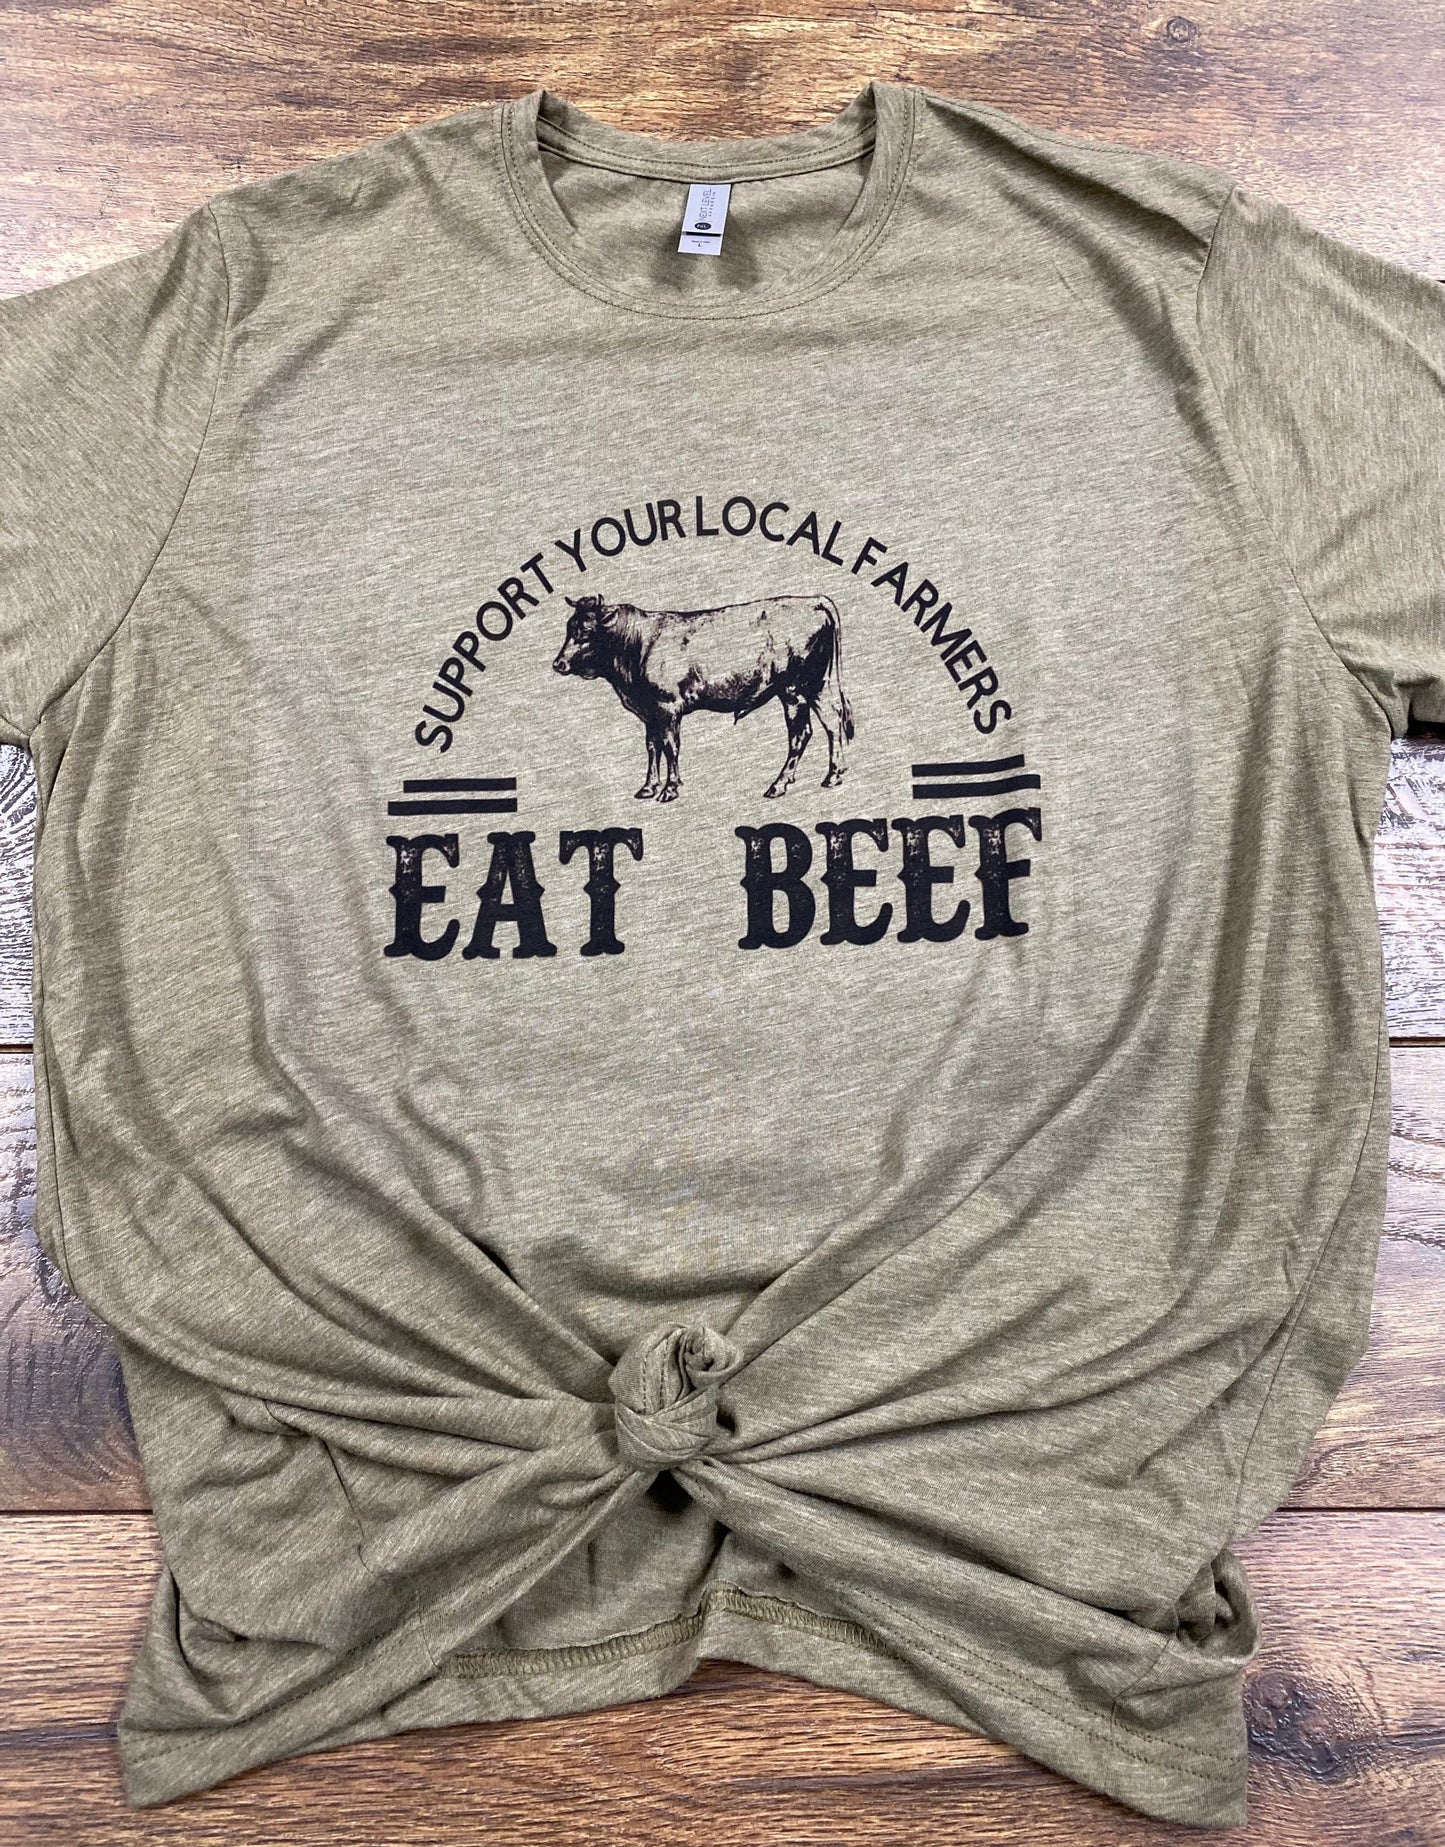 Eat beef, support local farmers